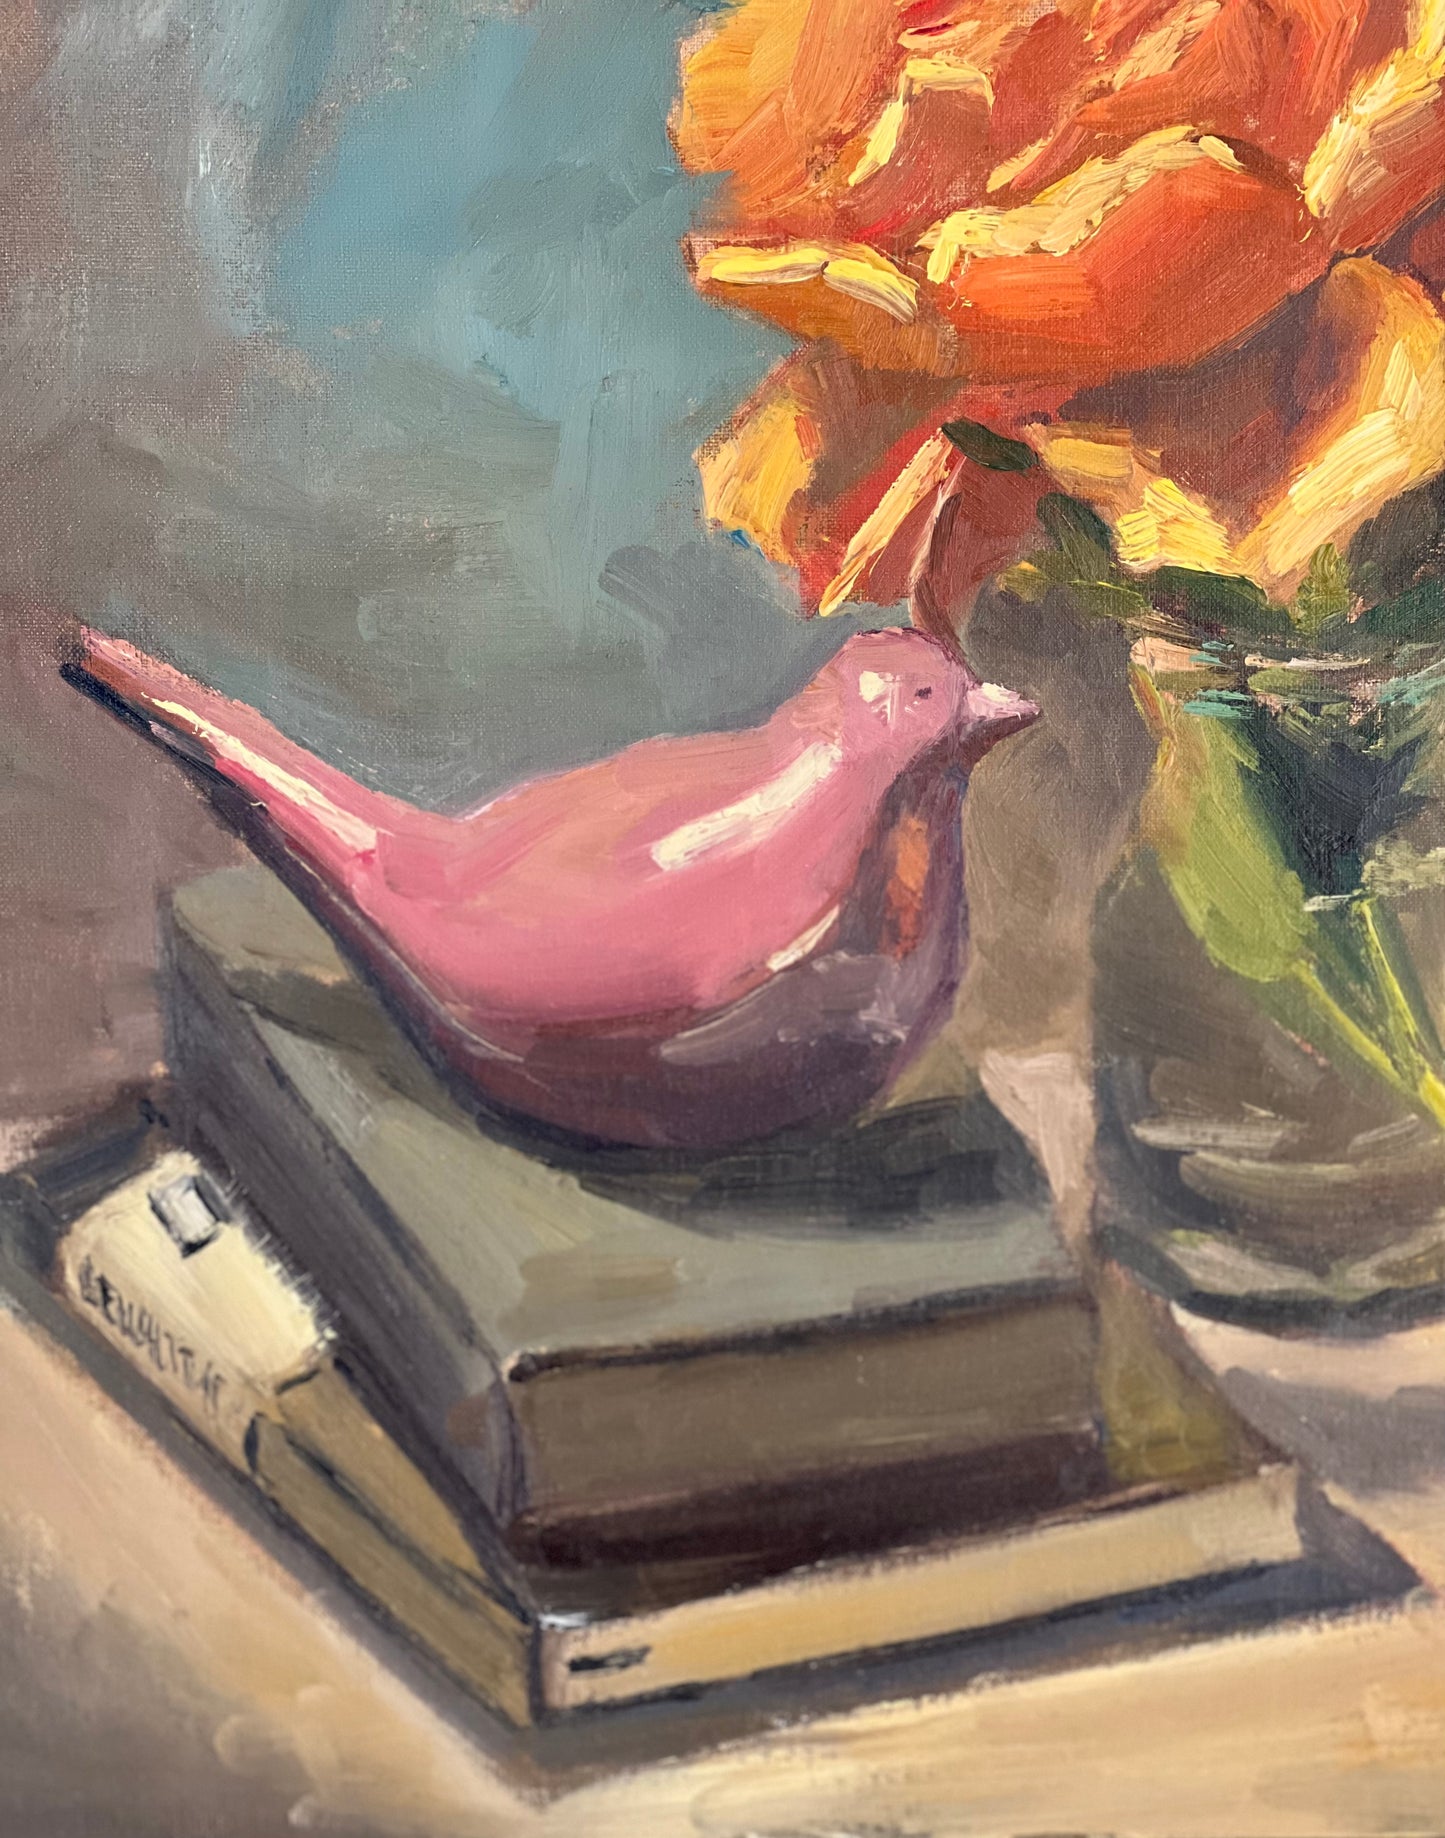 Large Oil Painting of Roses - A rose and some books!